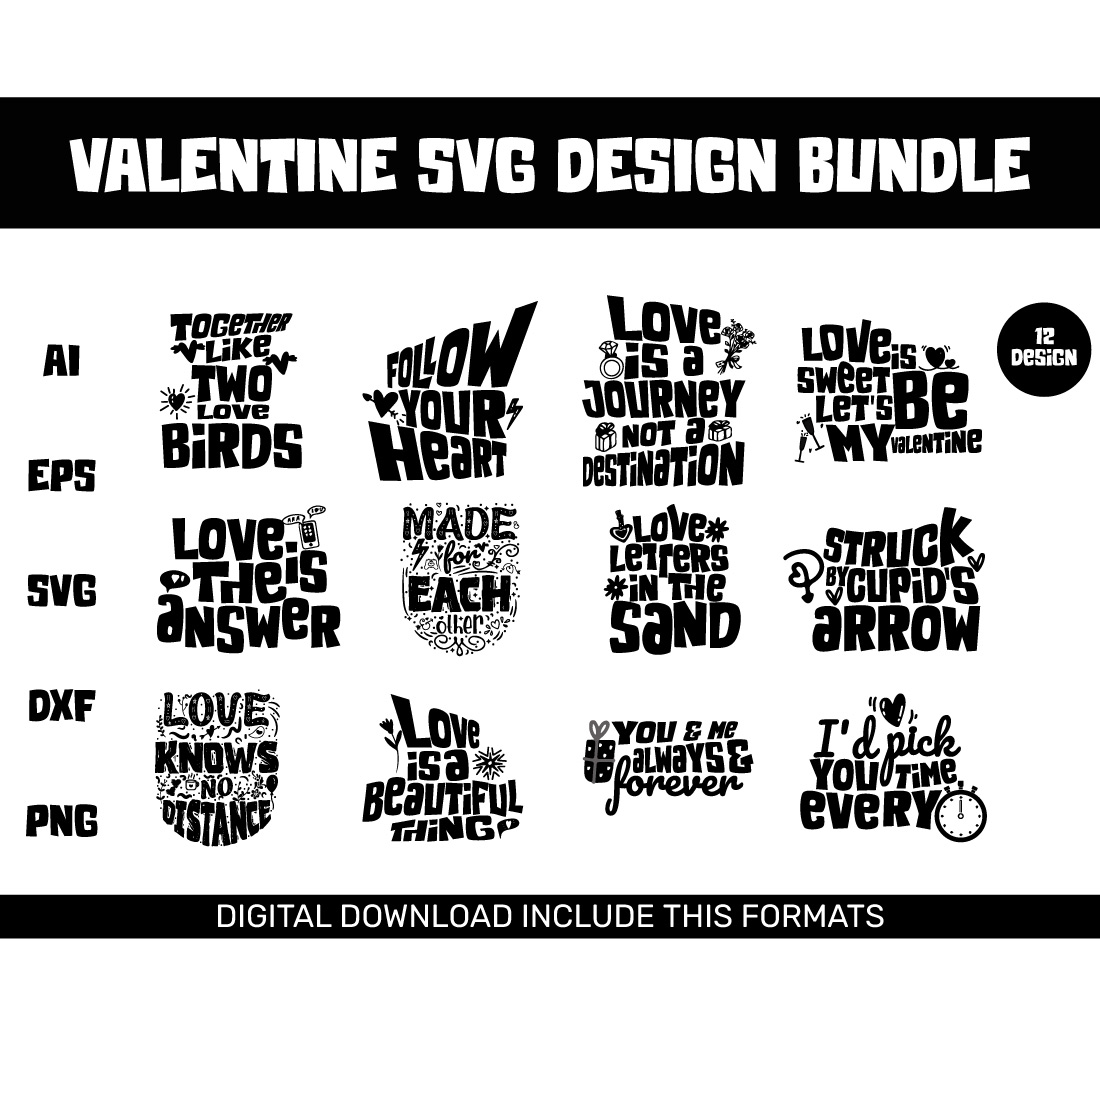 12 Valentine Day Quote Sayings SVG Bundle Vol1 cover image.